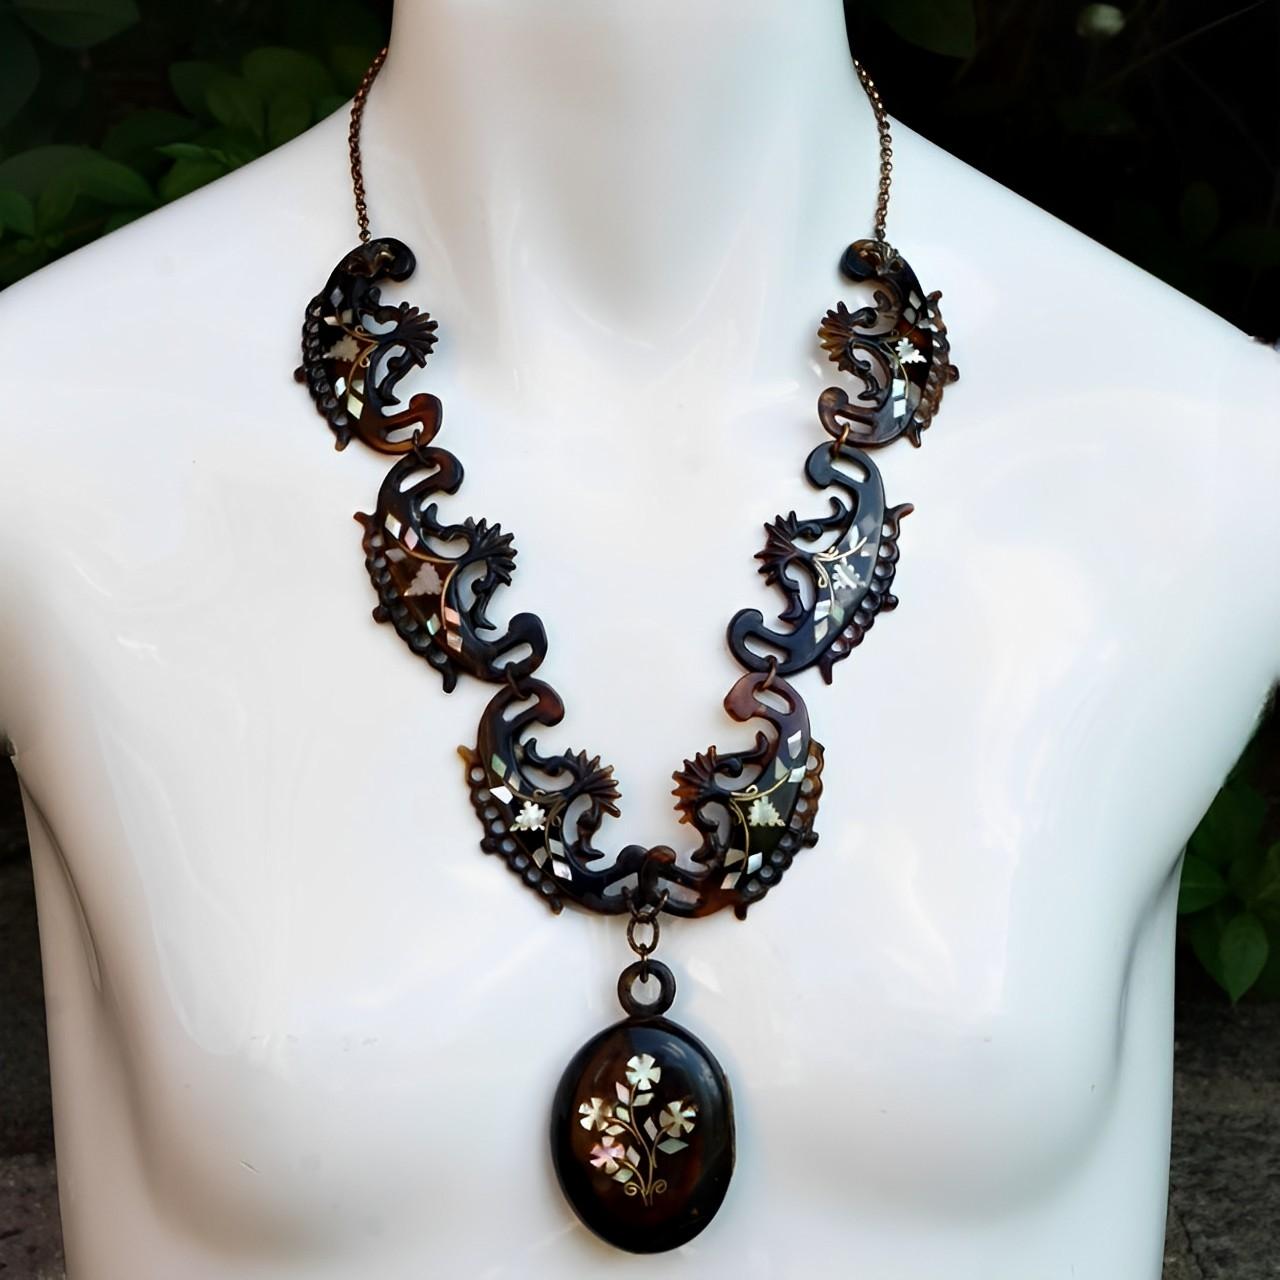 Antique Victorian tortoiseshell necklace and locket inlaid with gold and mother of pearl. This fine quality piece has the most beautiful piqué work, which has been done by hand. 

The necklace is length 55 cm / 21.6 inches. The tortoiseshell on the